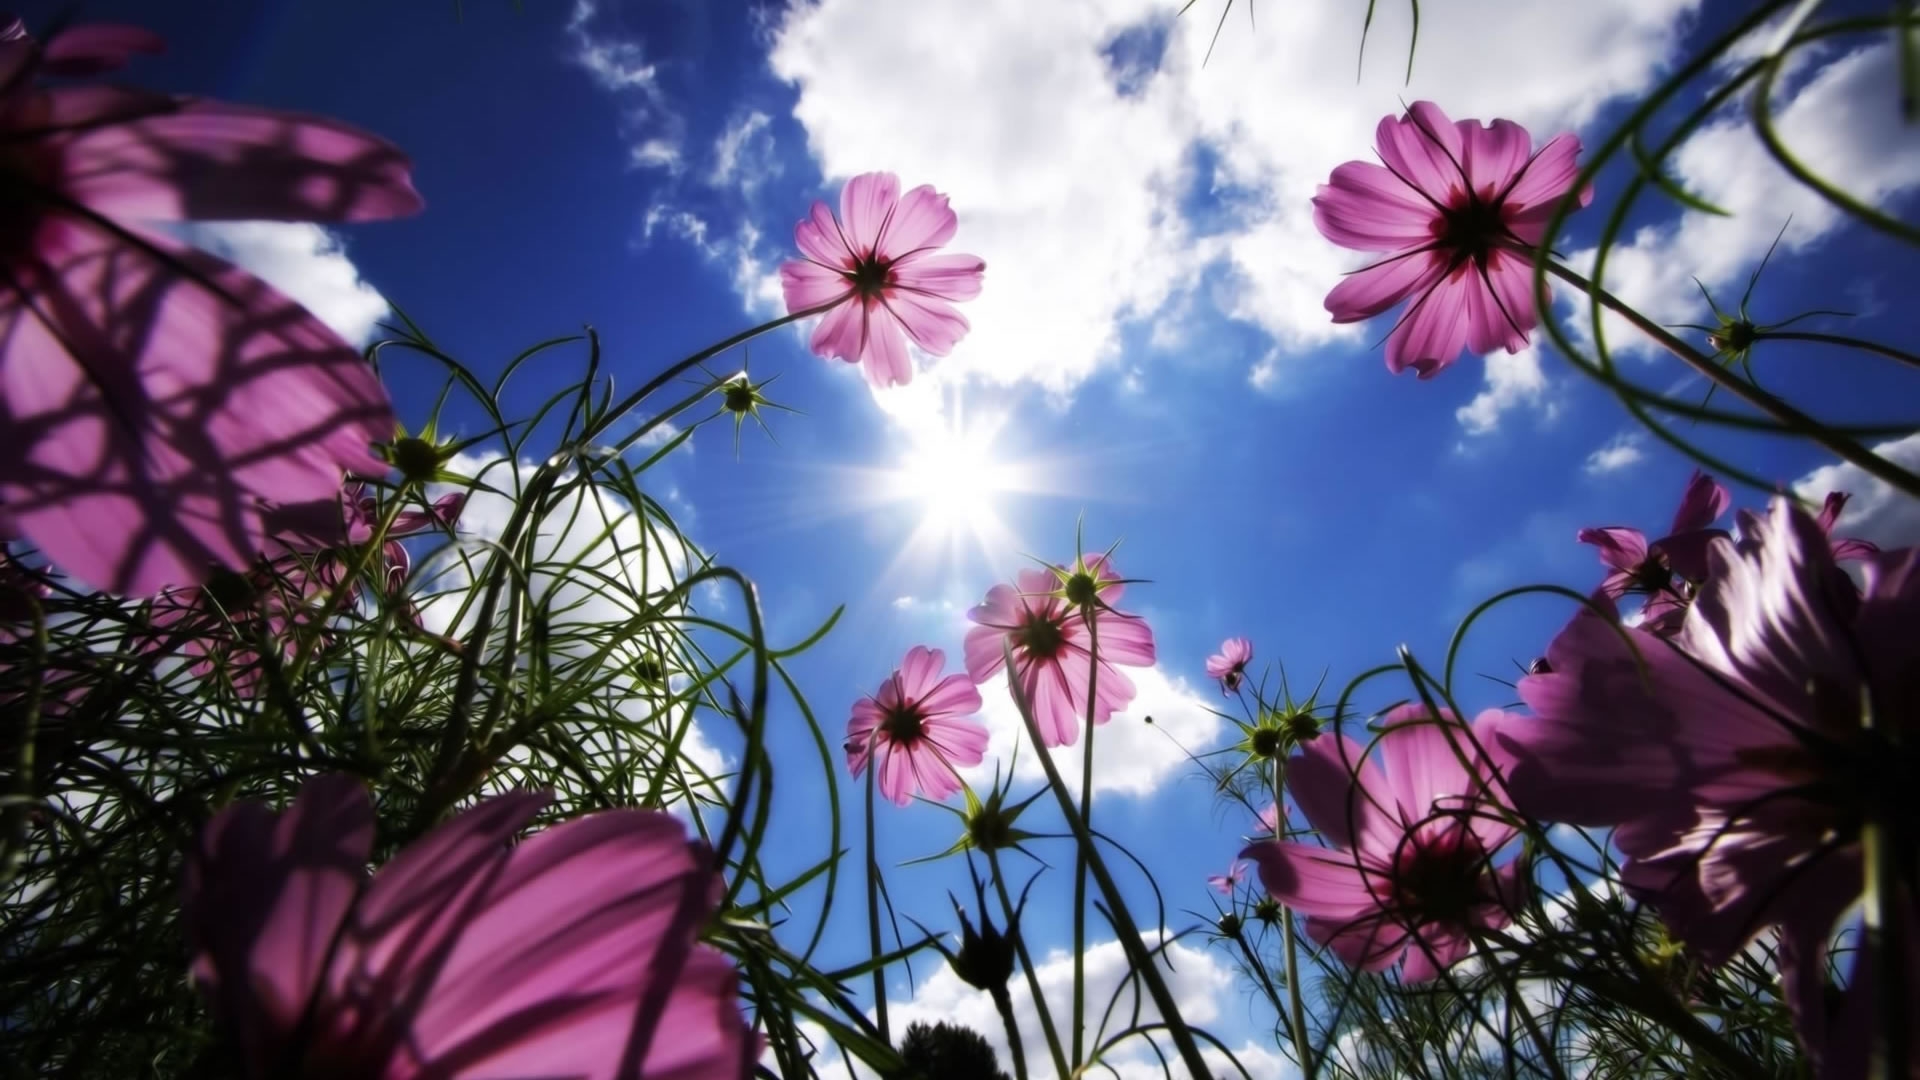 Flowers under the sun for 1920 x 1080 HDTV 1080p resolution